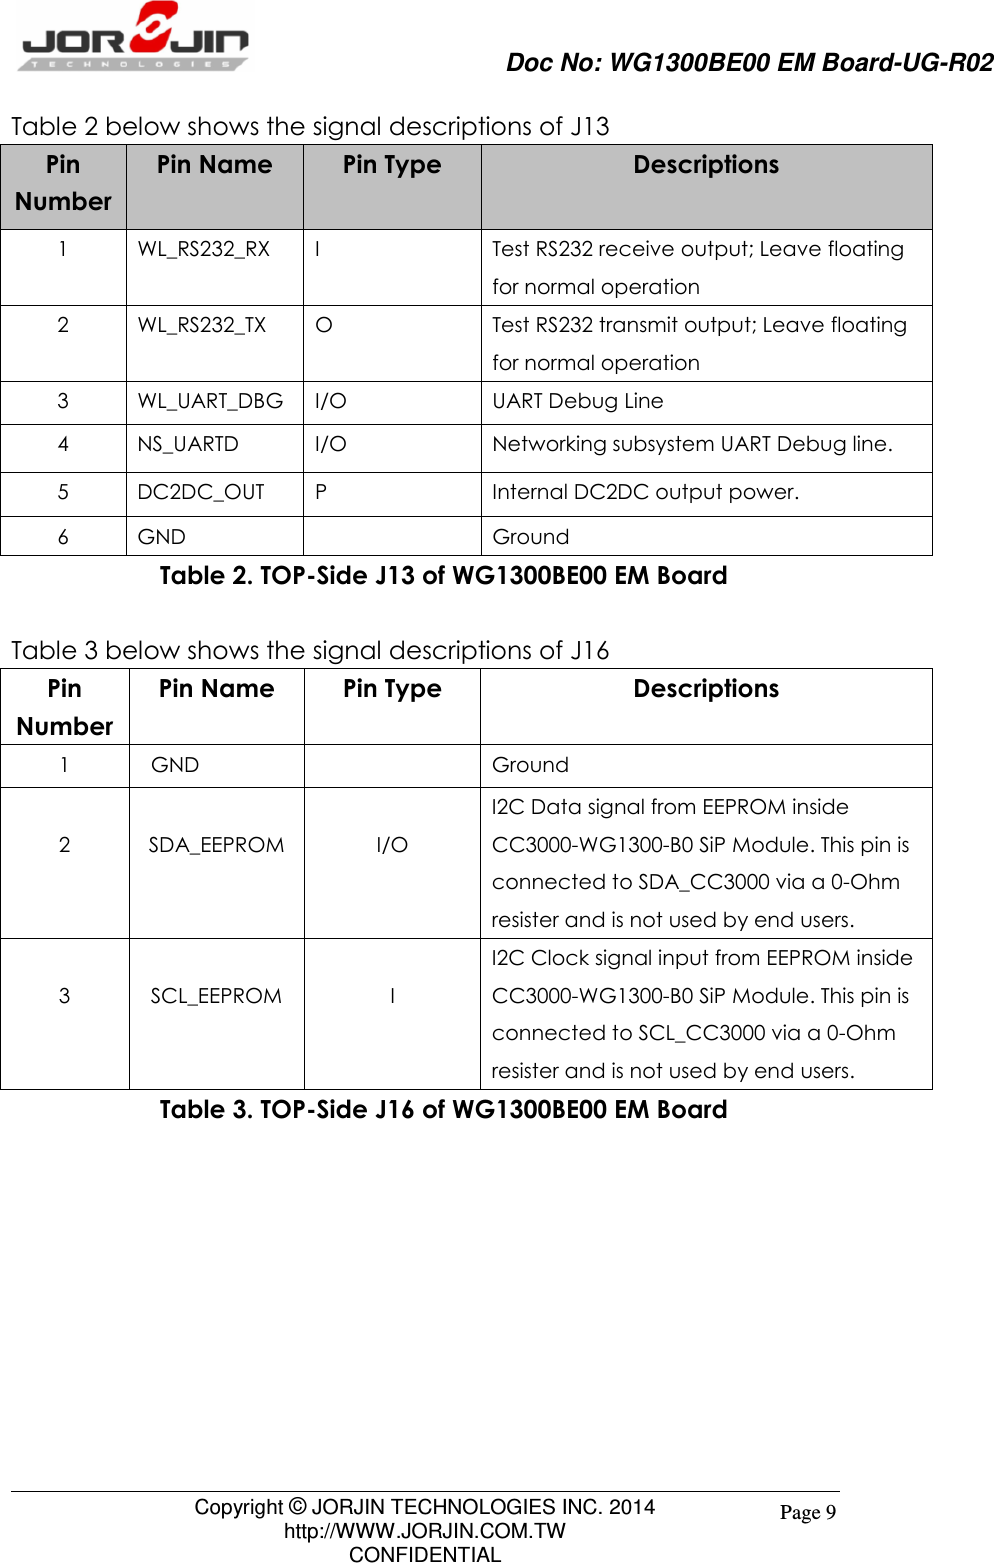                     Doc No: WG1300BE00 EM Board-UG-R02                                                                                        Copyright © JORJIN TECHNOLOGIES INC. 2014 http://WWW.JORJIN.COM.TW CONFIDENTIAL Page 9 Table 2 below shows the signal descriptions of J13 Pin Number Pin Name Pin Type Descriptions 1 WL_RS232_RX I Test RS232 receive output; Leave floating for normal operation 2 WL_RS232_TX O Test RS232 transmit output; Leave floating for normal operation   3 WL_UART_DBG I/O UART Debug Line 4 NS_UARTD I/O Networking subsystem UART Debug line. 5 DC2DC_OUT P Internal DC2DC output power. 6 GND  Ground Table 2. TOP-Side J13 of WG1300BE00 EM Board  Table 3 below shows the signal descriptions of J16 Pin Number Pin Name Pin Type Descriptions 1 GND  Ground  2  SDA_EEPROM  I/O I2C Data signal from EEPROM inside CC3000-WG1300-B0 SiP Module. This pin is connected to SDA_CC3000 via a 0-Ohm resister and is not used by end users.  3  SCL_EEPROM  I I2C Clock signal input from EEPROM inside CC3000-WG1300-B0 SiP Module. This pin is connected to SCL_CC3000 via a 0-Ohm resister and is not used by end users. Table 3. TOP-Side J16 of WG1300BE00 EM Board  